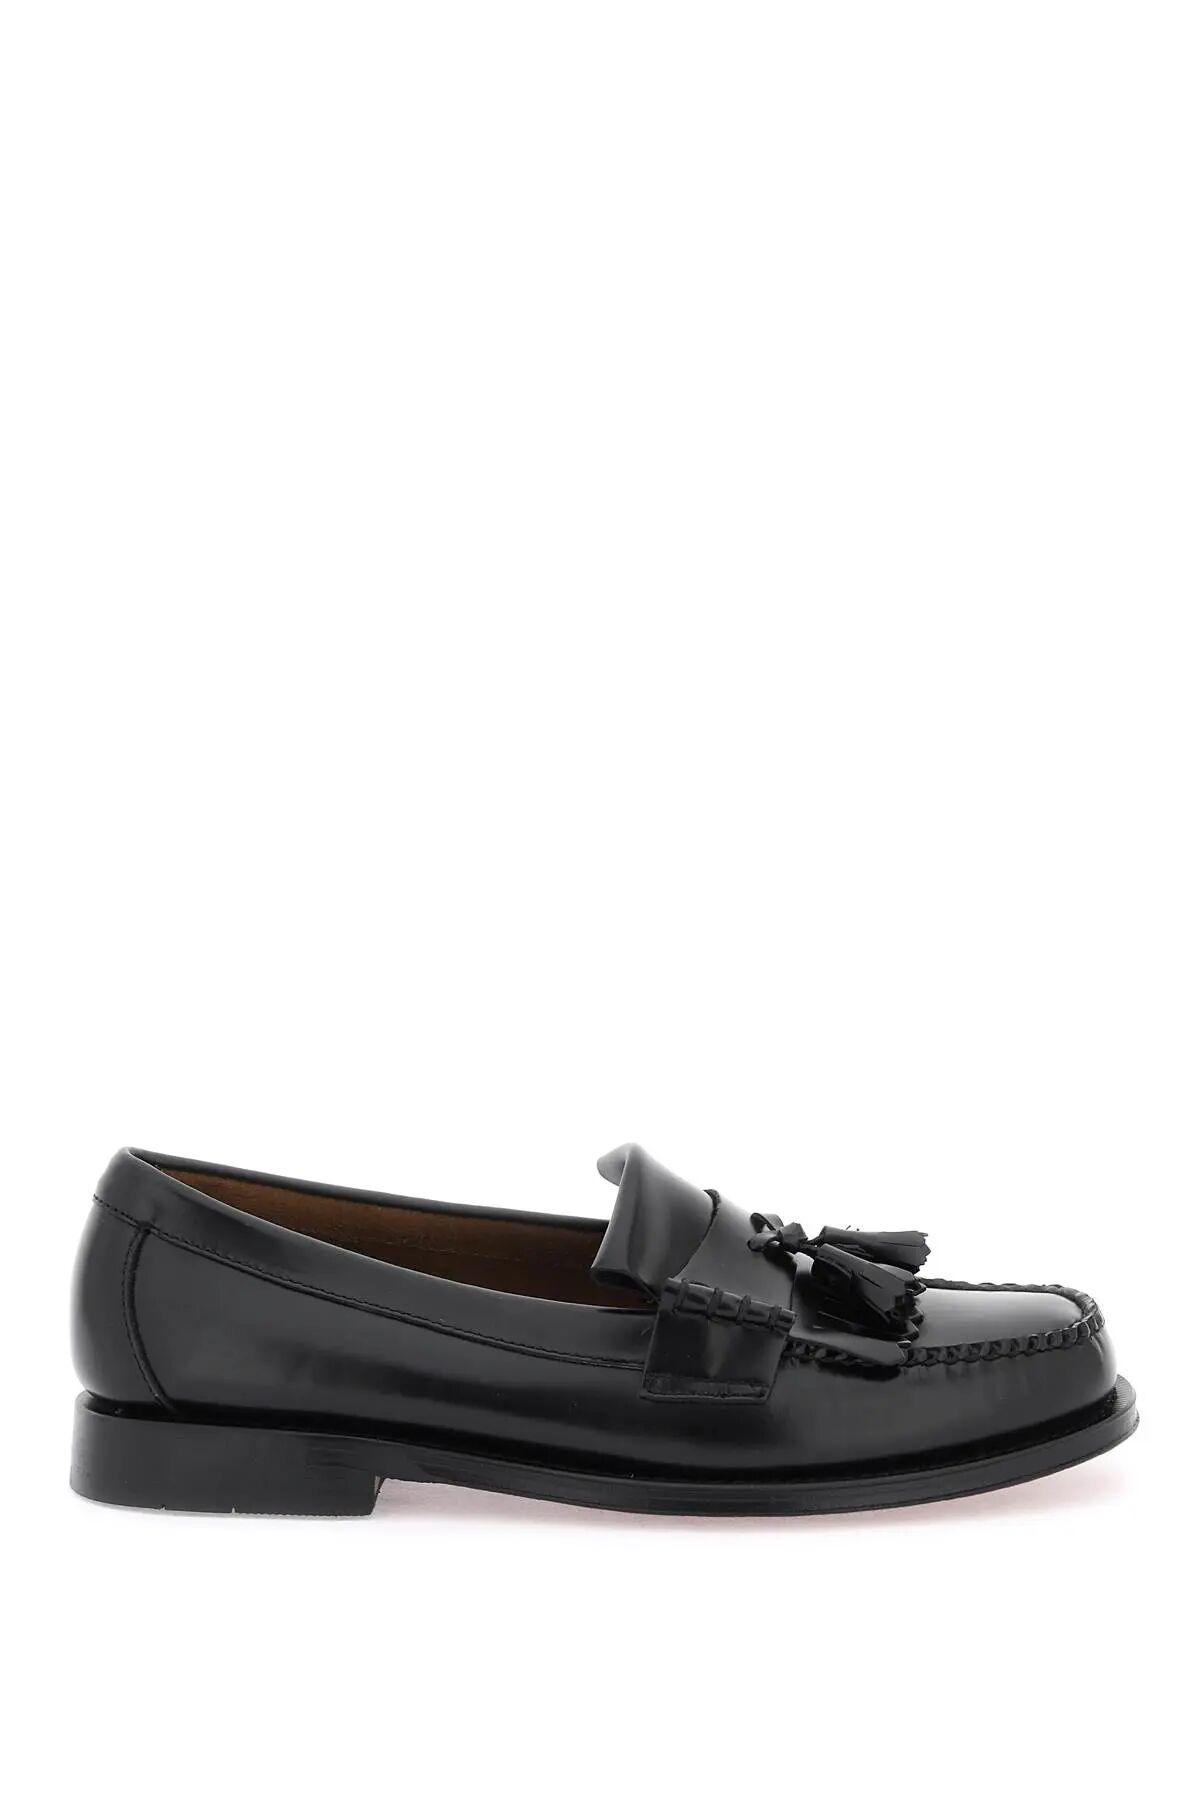 G.H. BASS Esther Kiltie Weejuns loafers  - Black - male - Size: 44